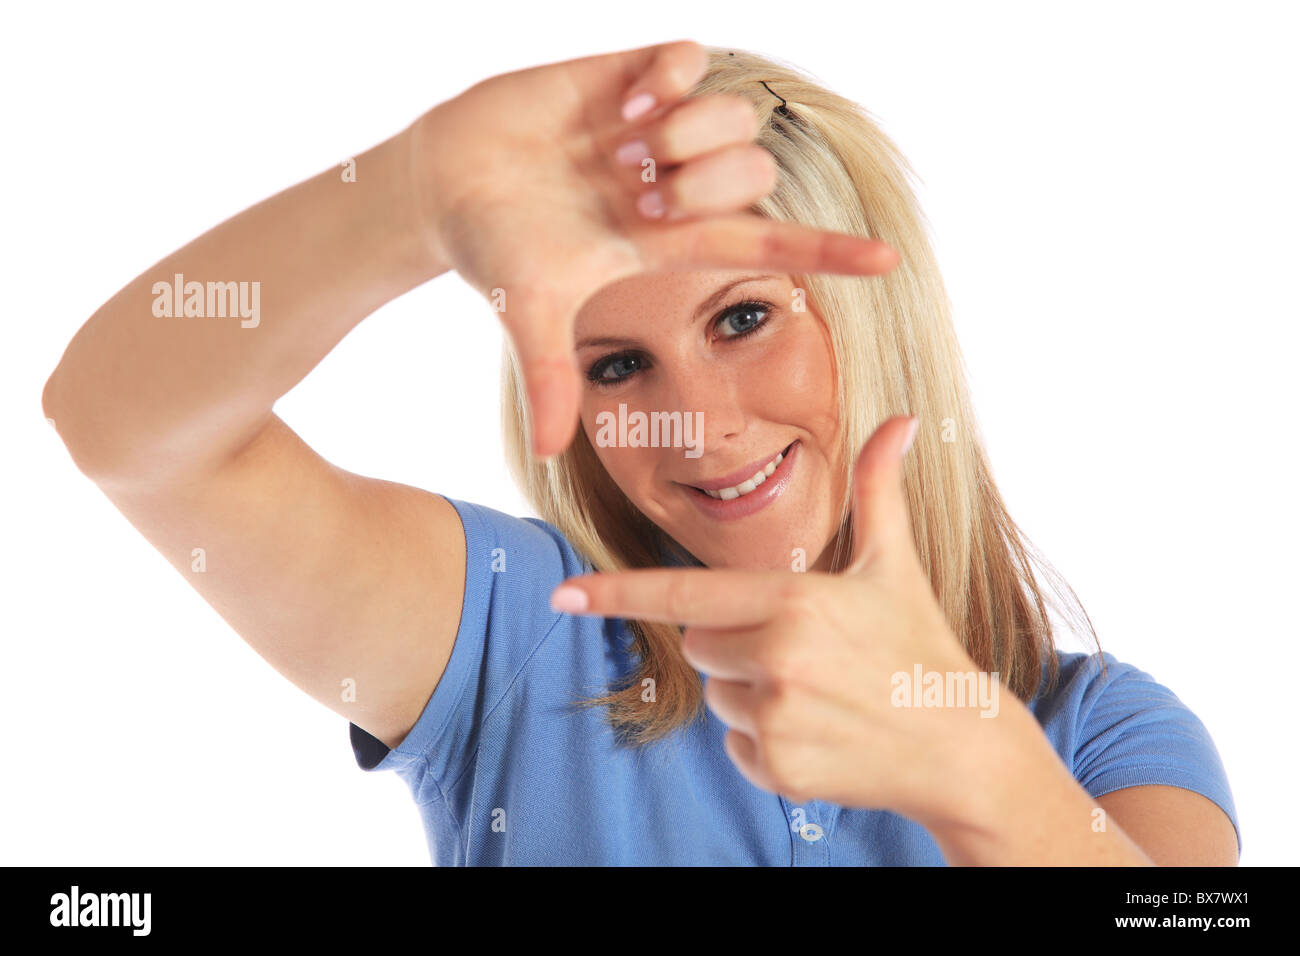 Attractive young woman building a frame out of her hands. All on white background. Stock Photo